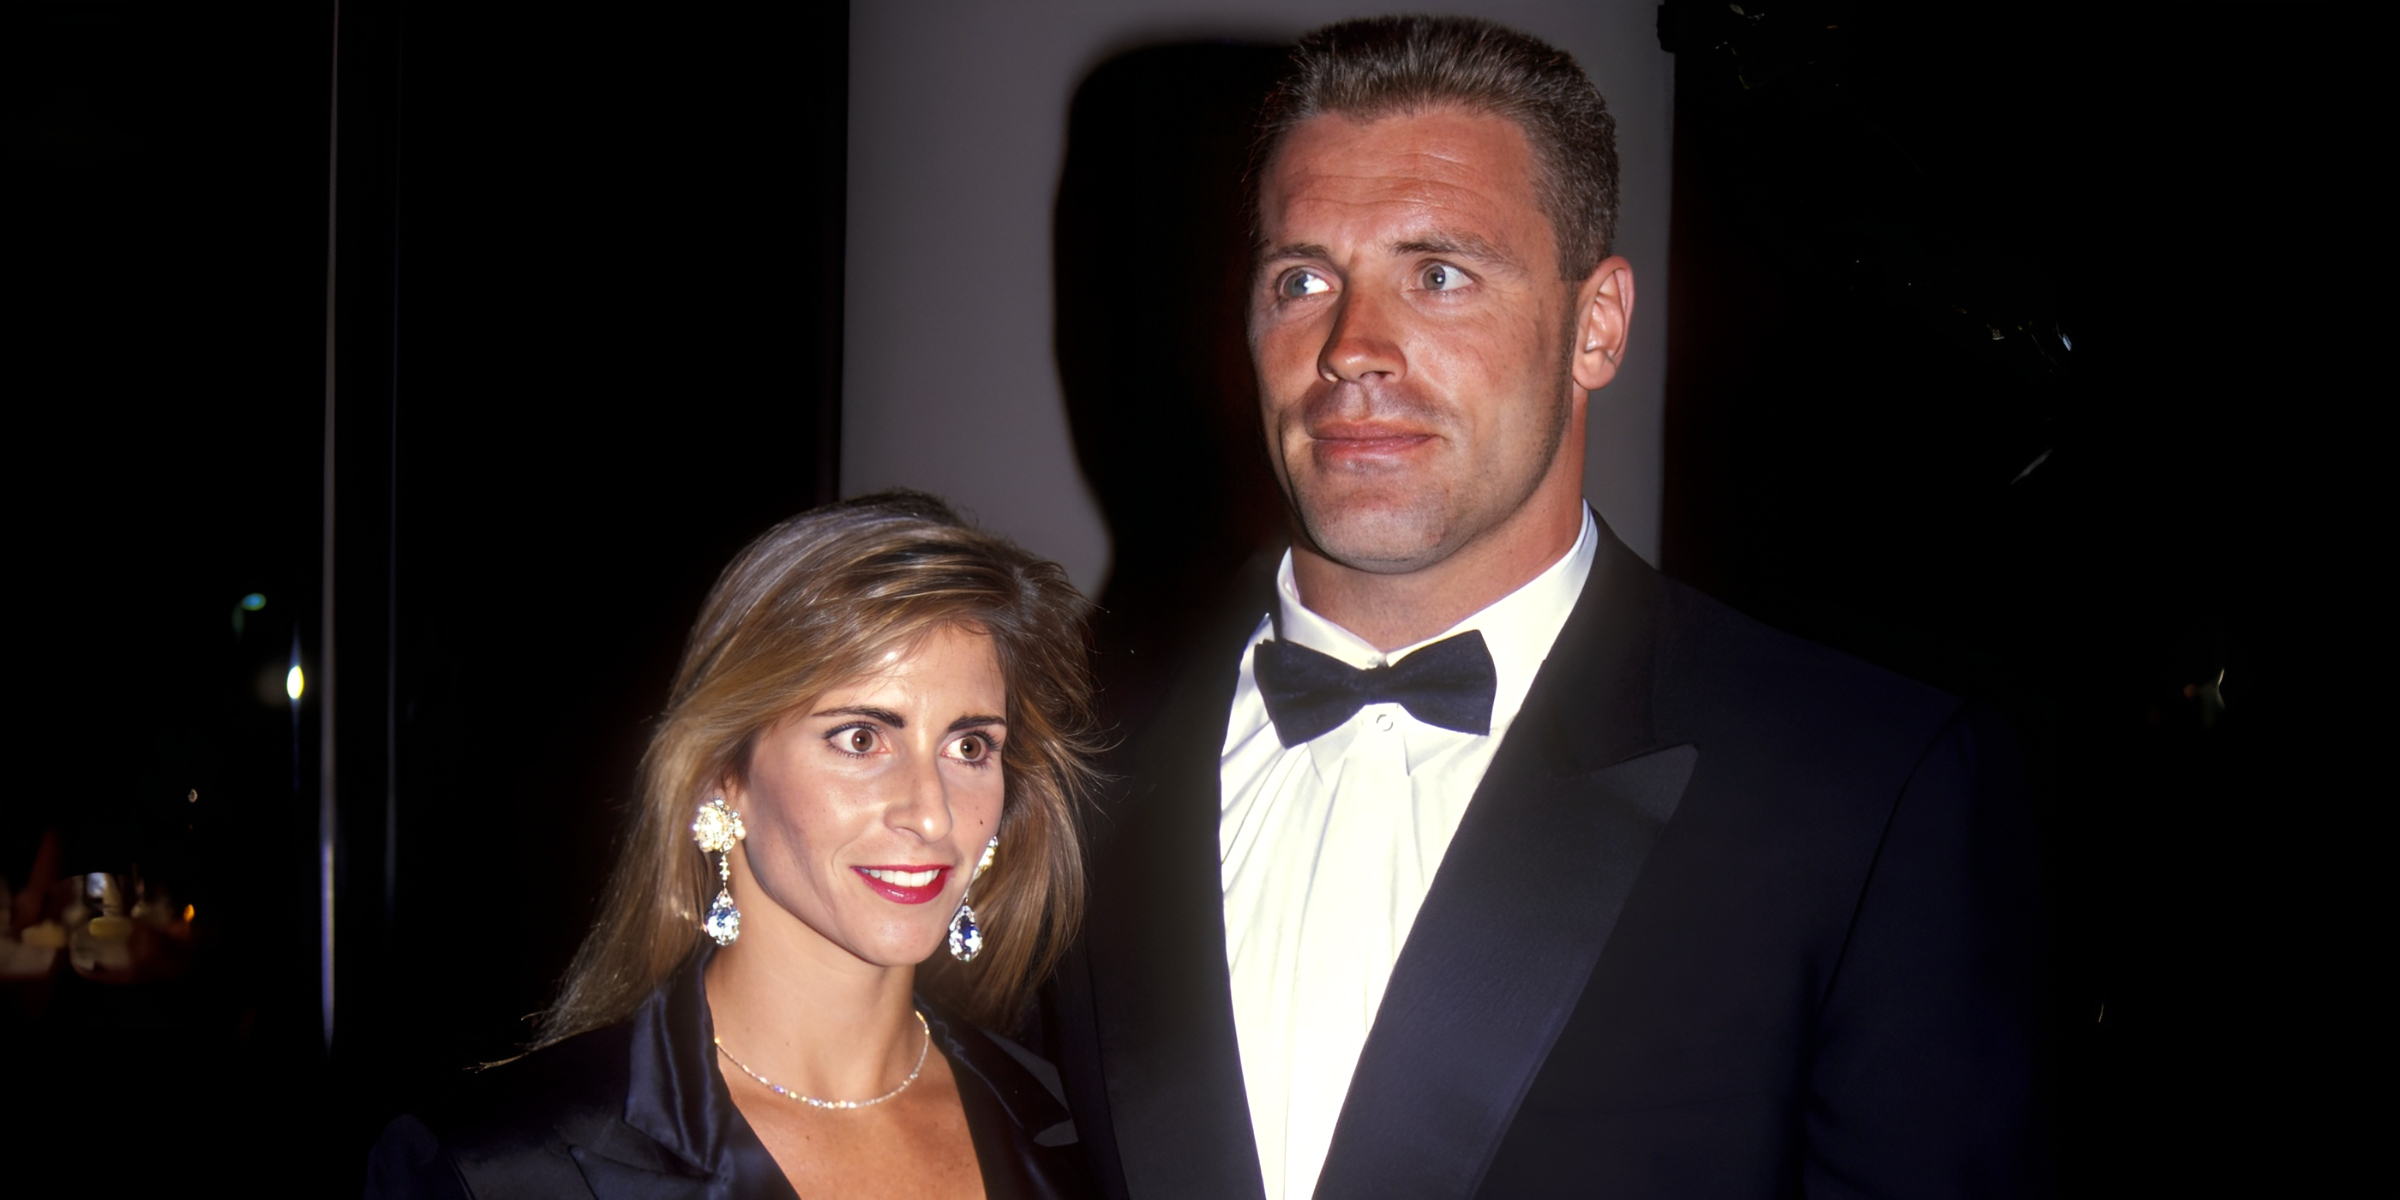 Diane Addonizio and Howie Long, 1992 | Source: Getty Images